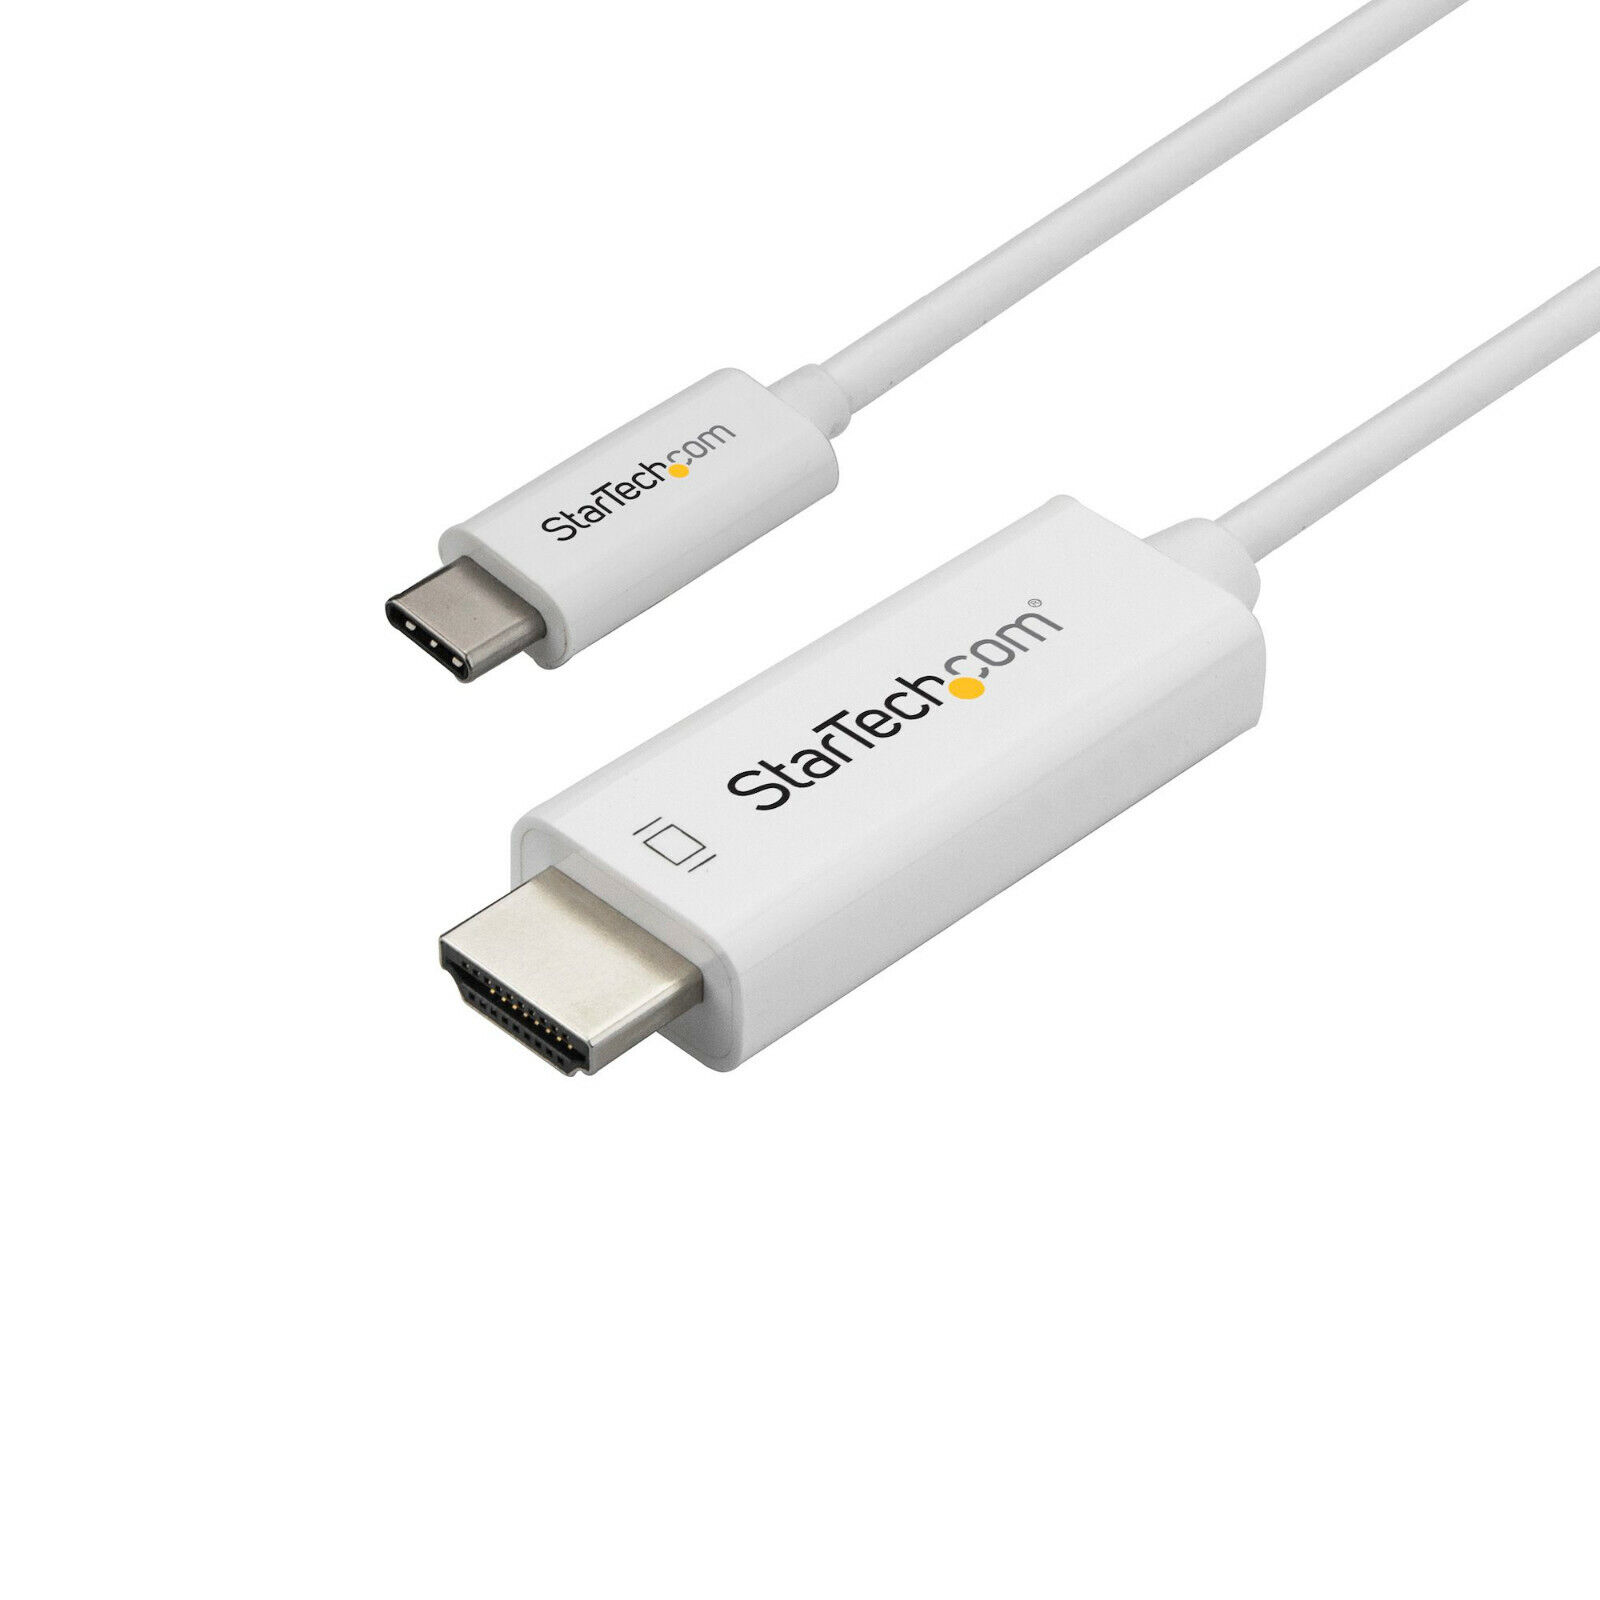 StarTech.com USB C to HDMI Cable - 4K 60Hz USB Type C to HDMI 2.0 Video Adapter 